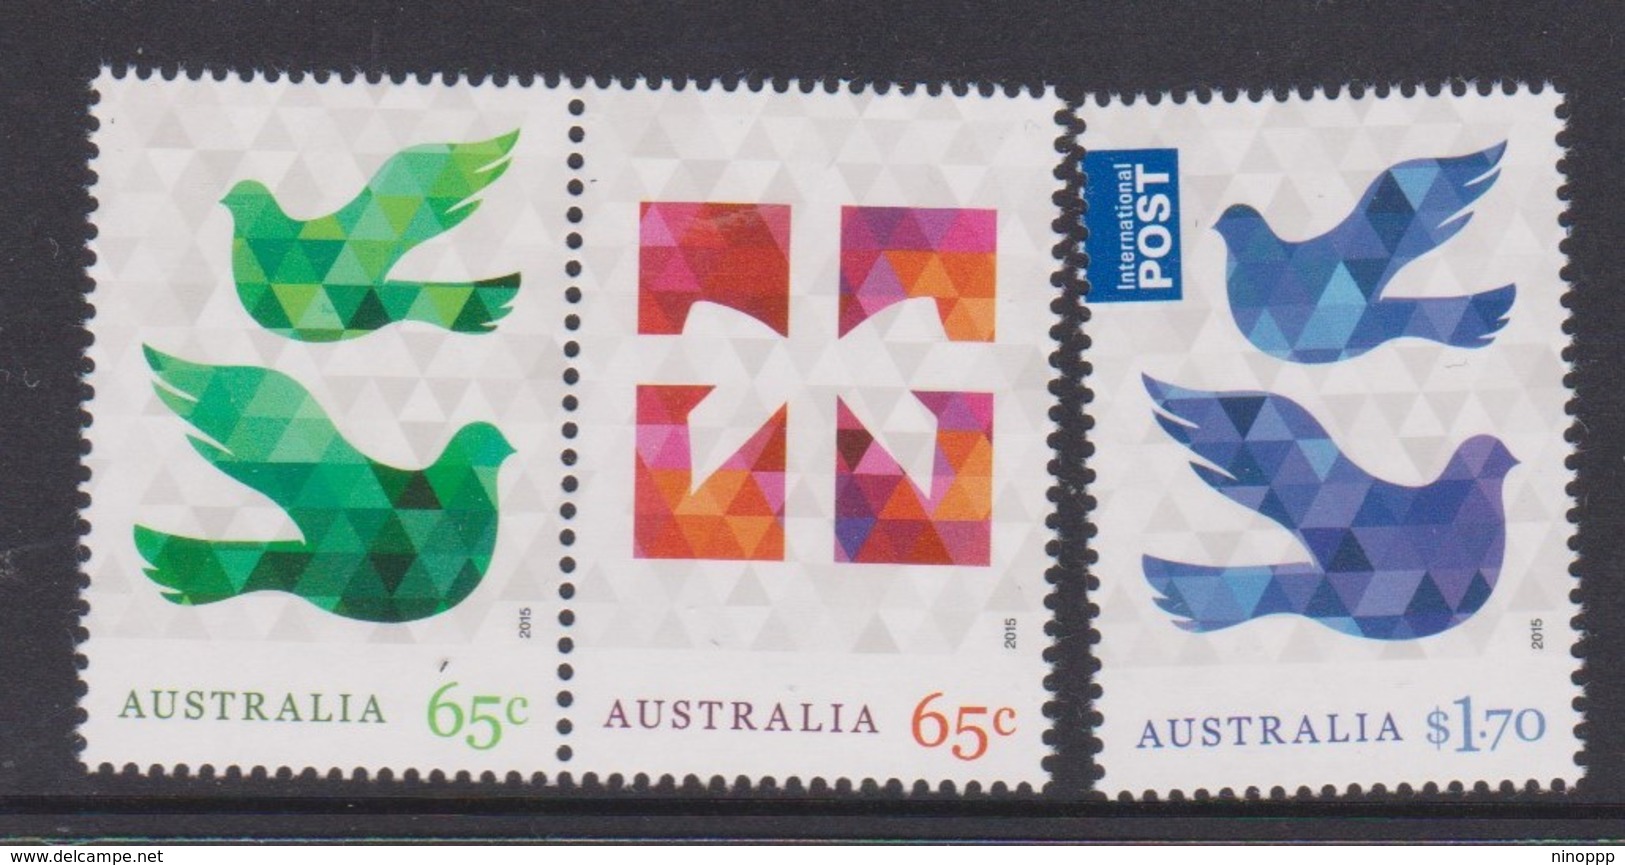 Australia ASC 3354-3356 2015 Christmas,mint Never Hinged - Mint Stamps